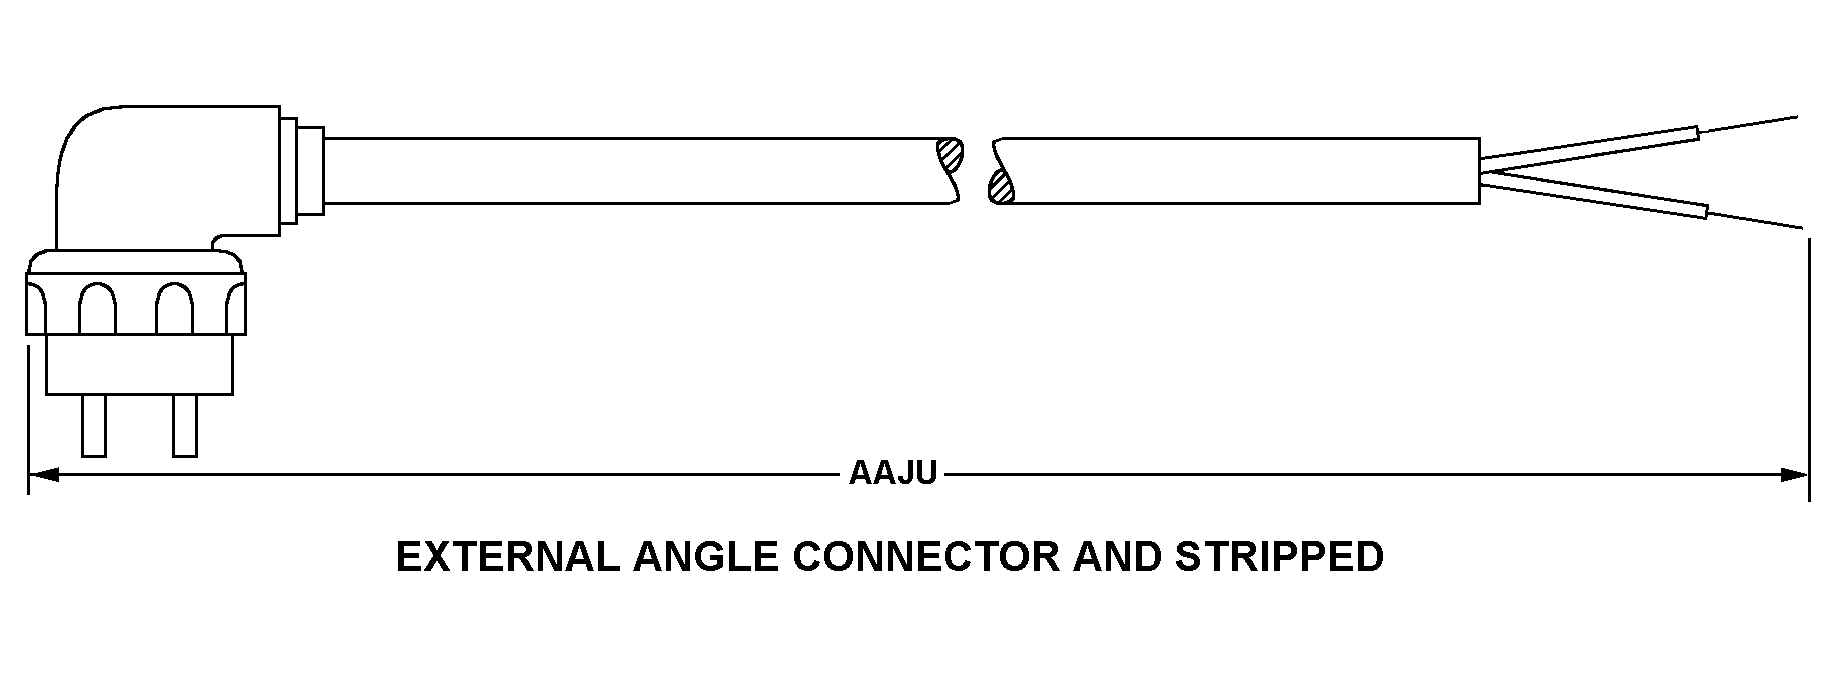 EXTERNAL ANGLE CONNECTOR AND STRIPPED style nsn 5995-01-122-4260